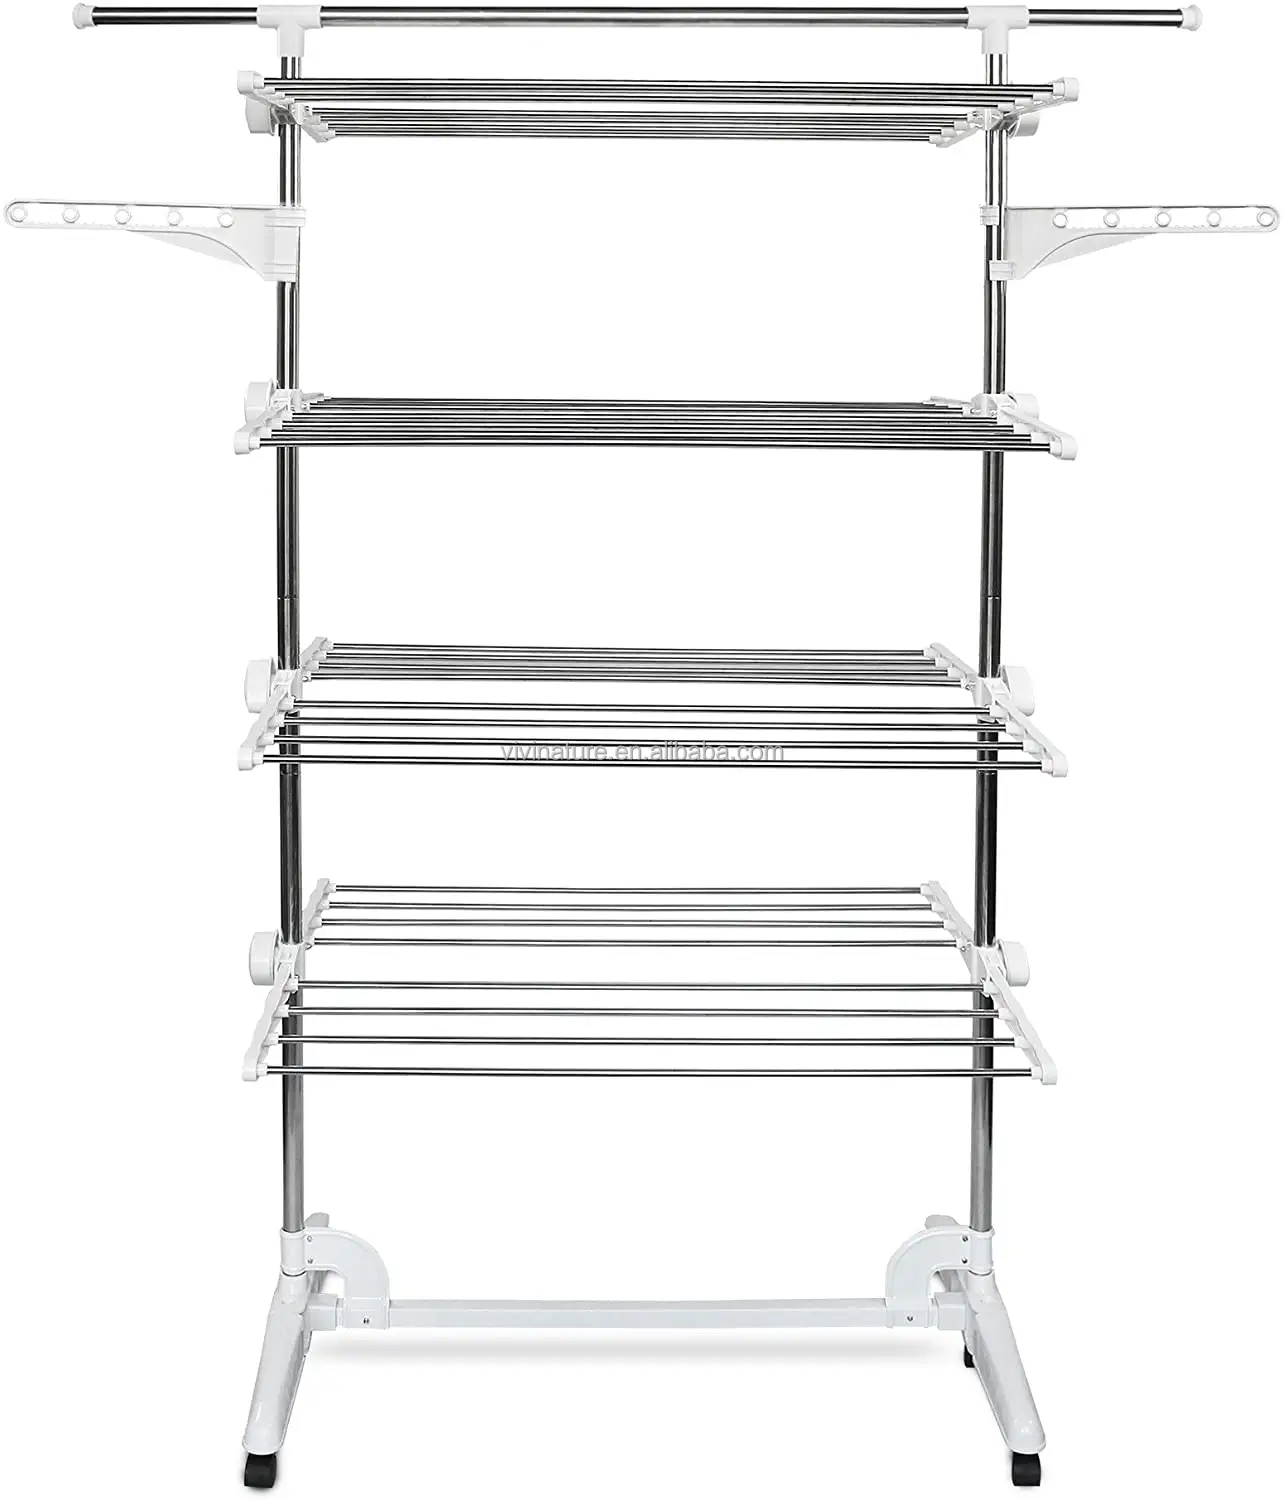 3 layers folding cloth storage shelf rack with 2 hanger for clothes storage organize